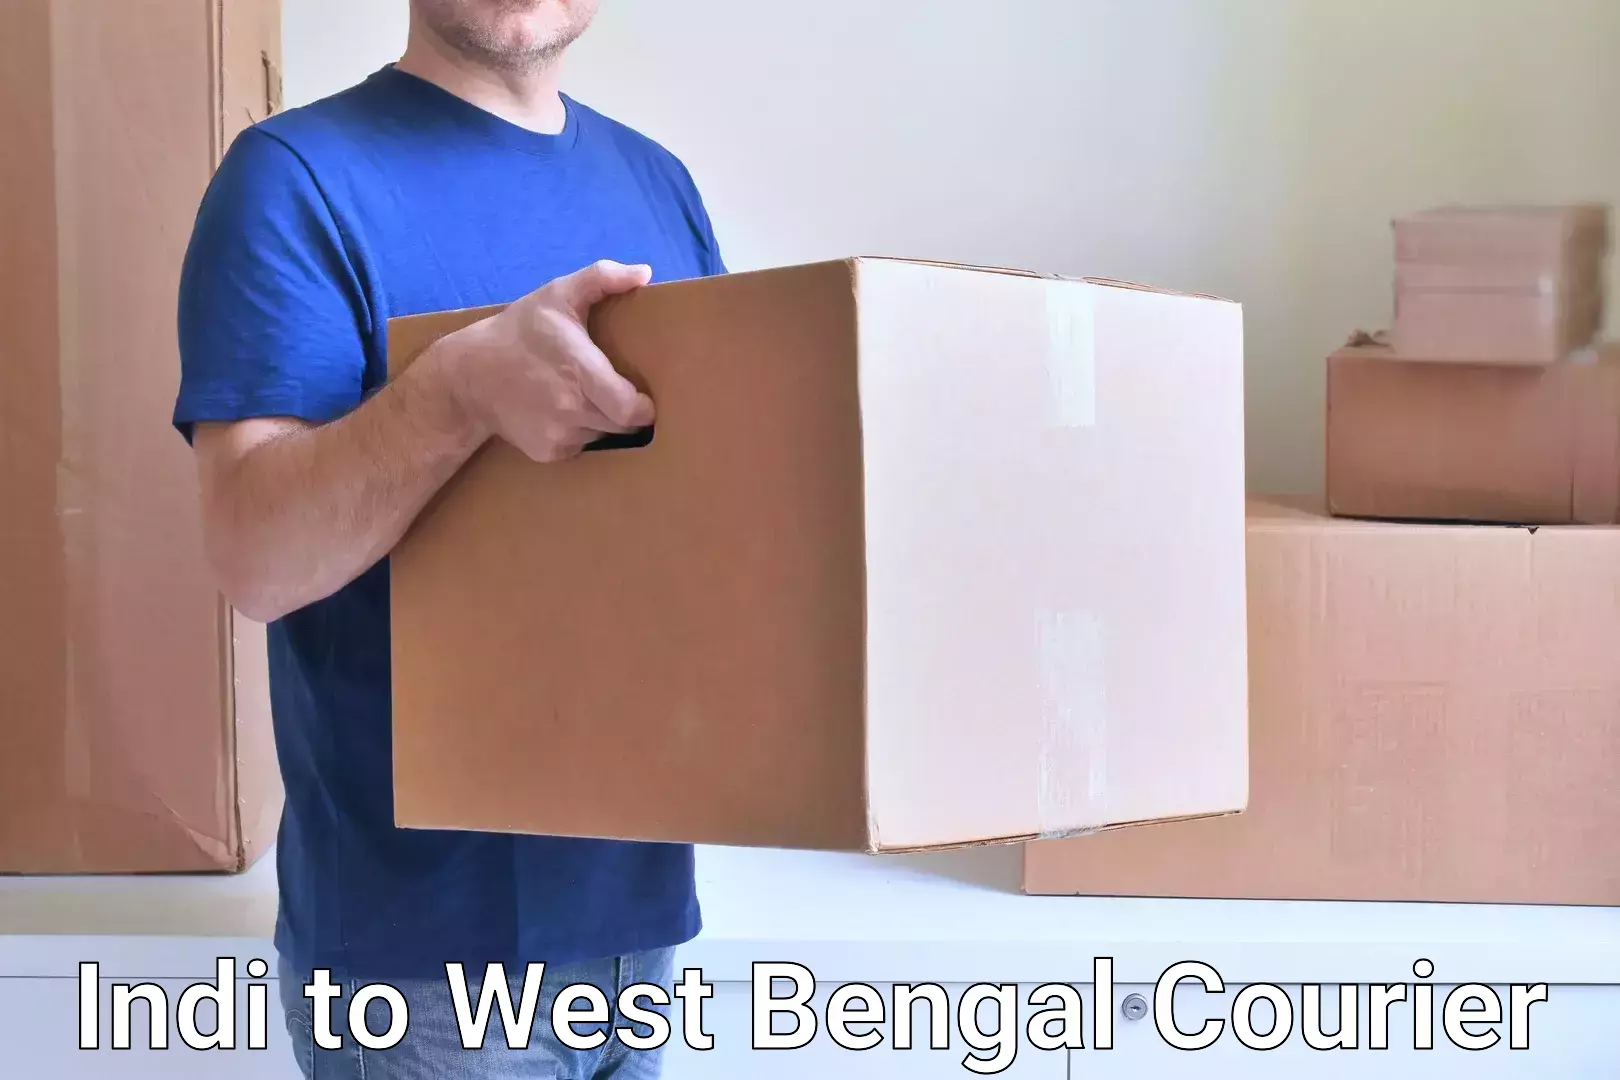 Reliable delivery network Indi to West Bengal